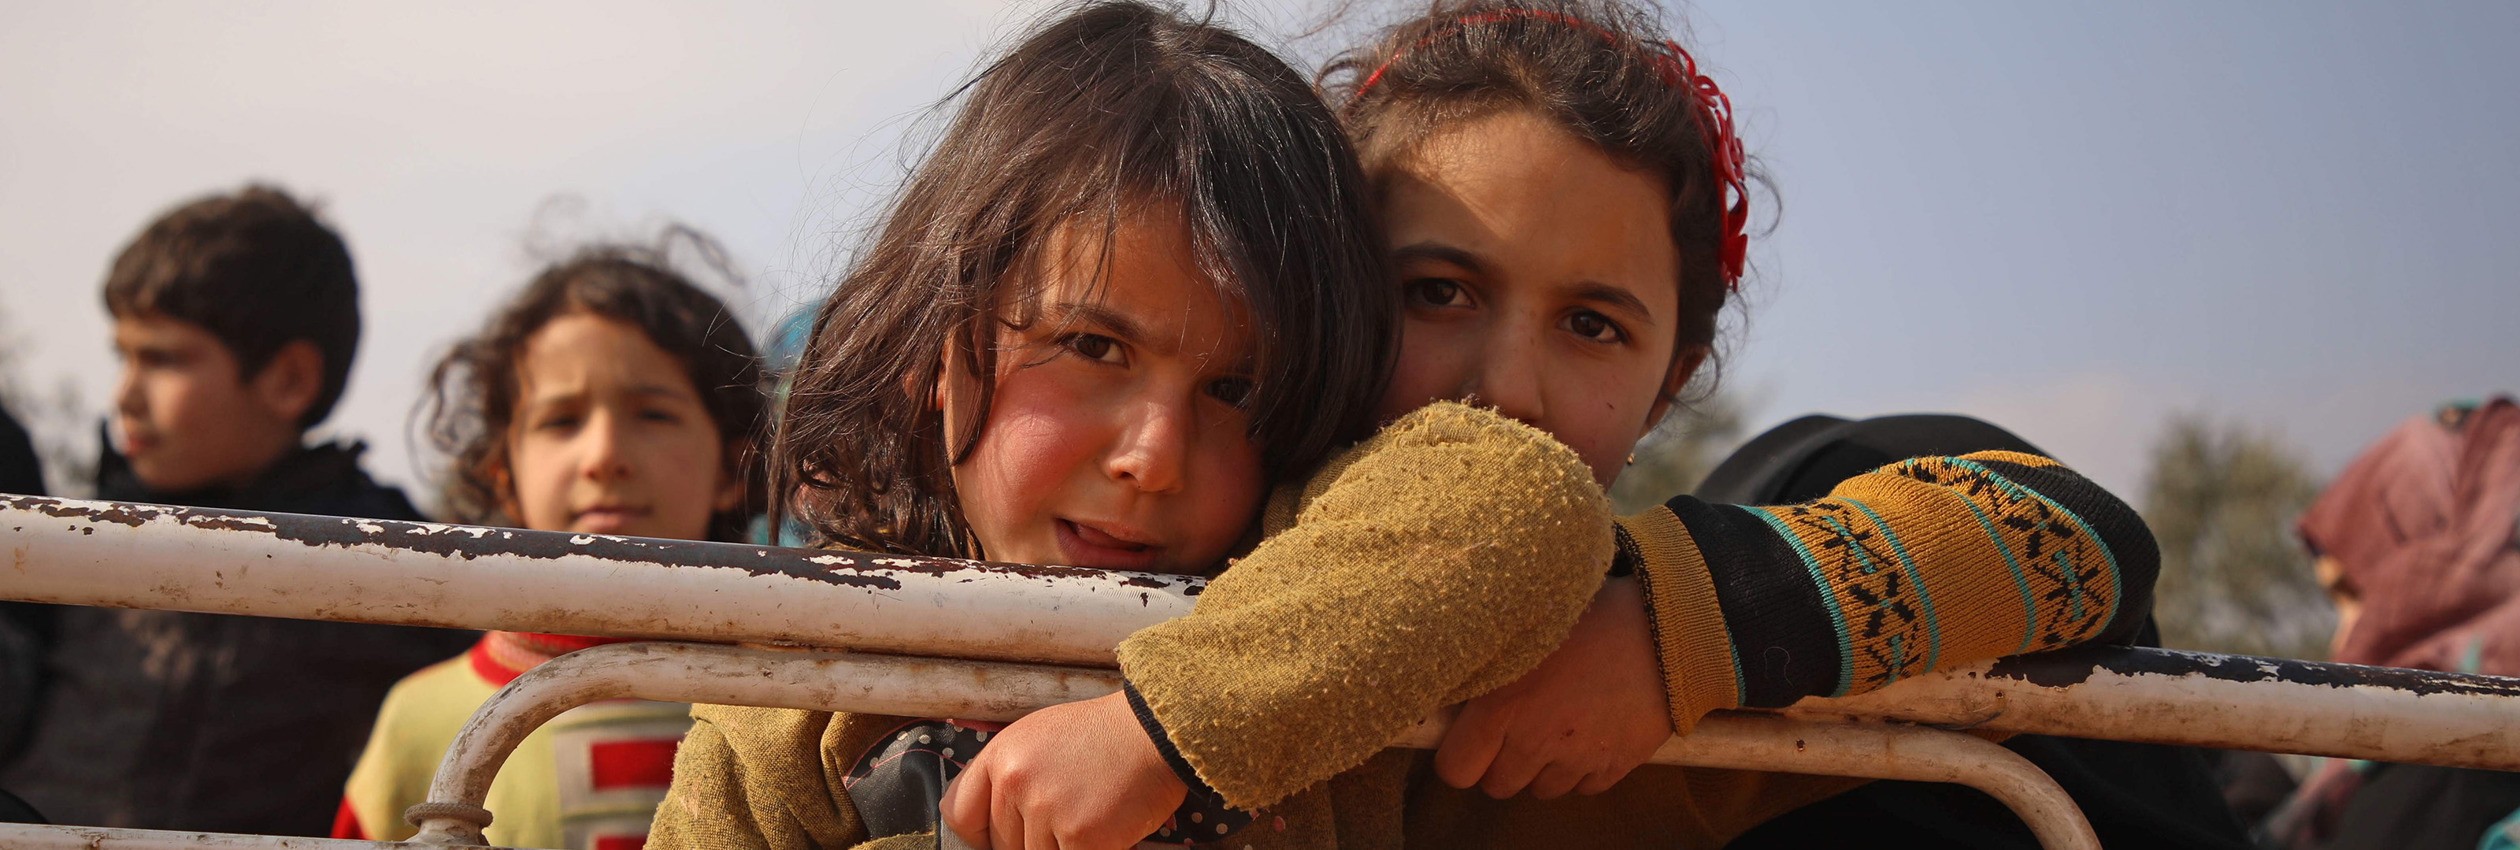 Two Syrian girls arrive at a newly established camp in Maaret Misrin in Idlib province